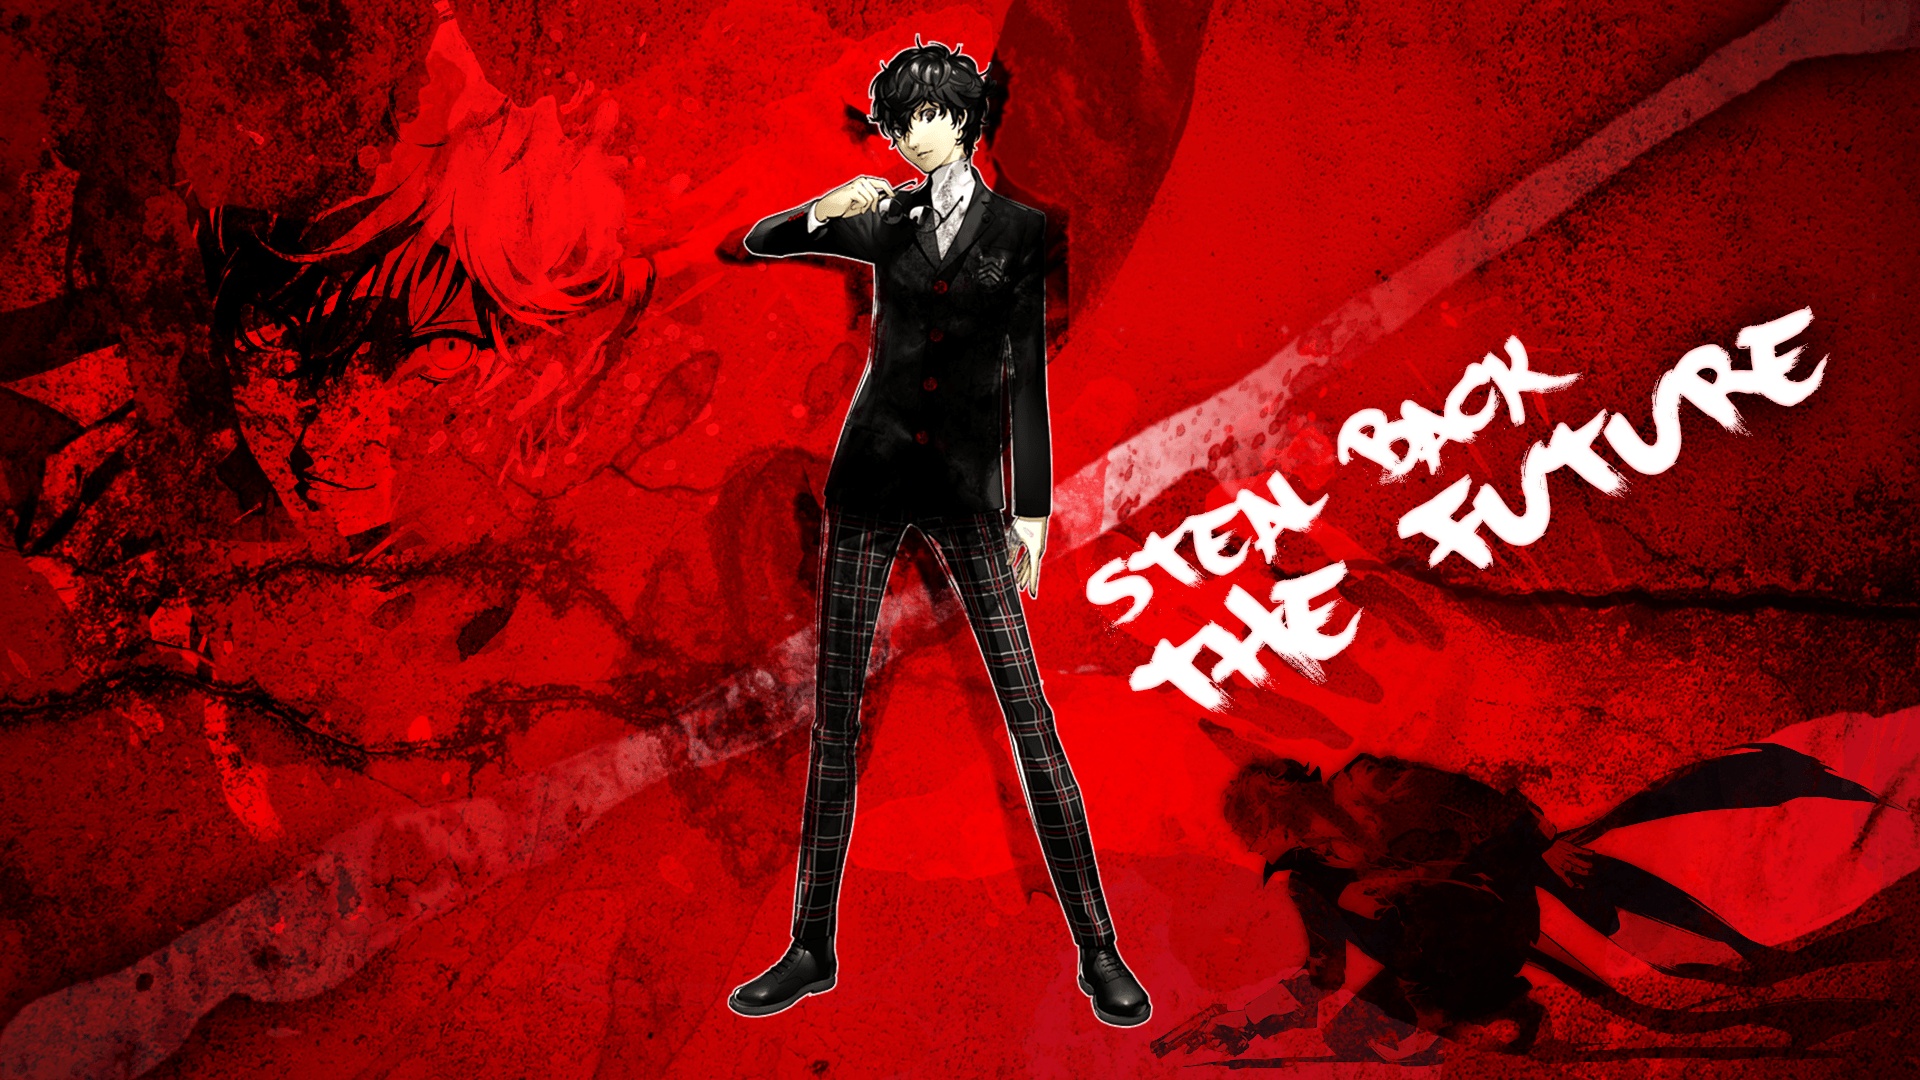 persona 5 wallpapers Wallpapers